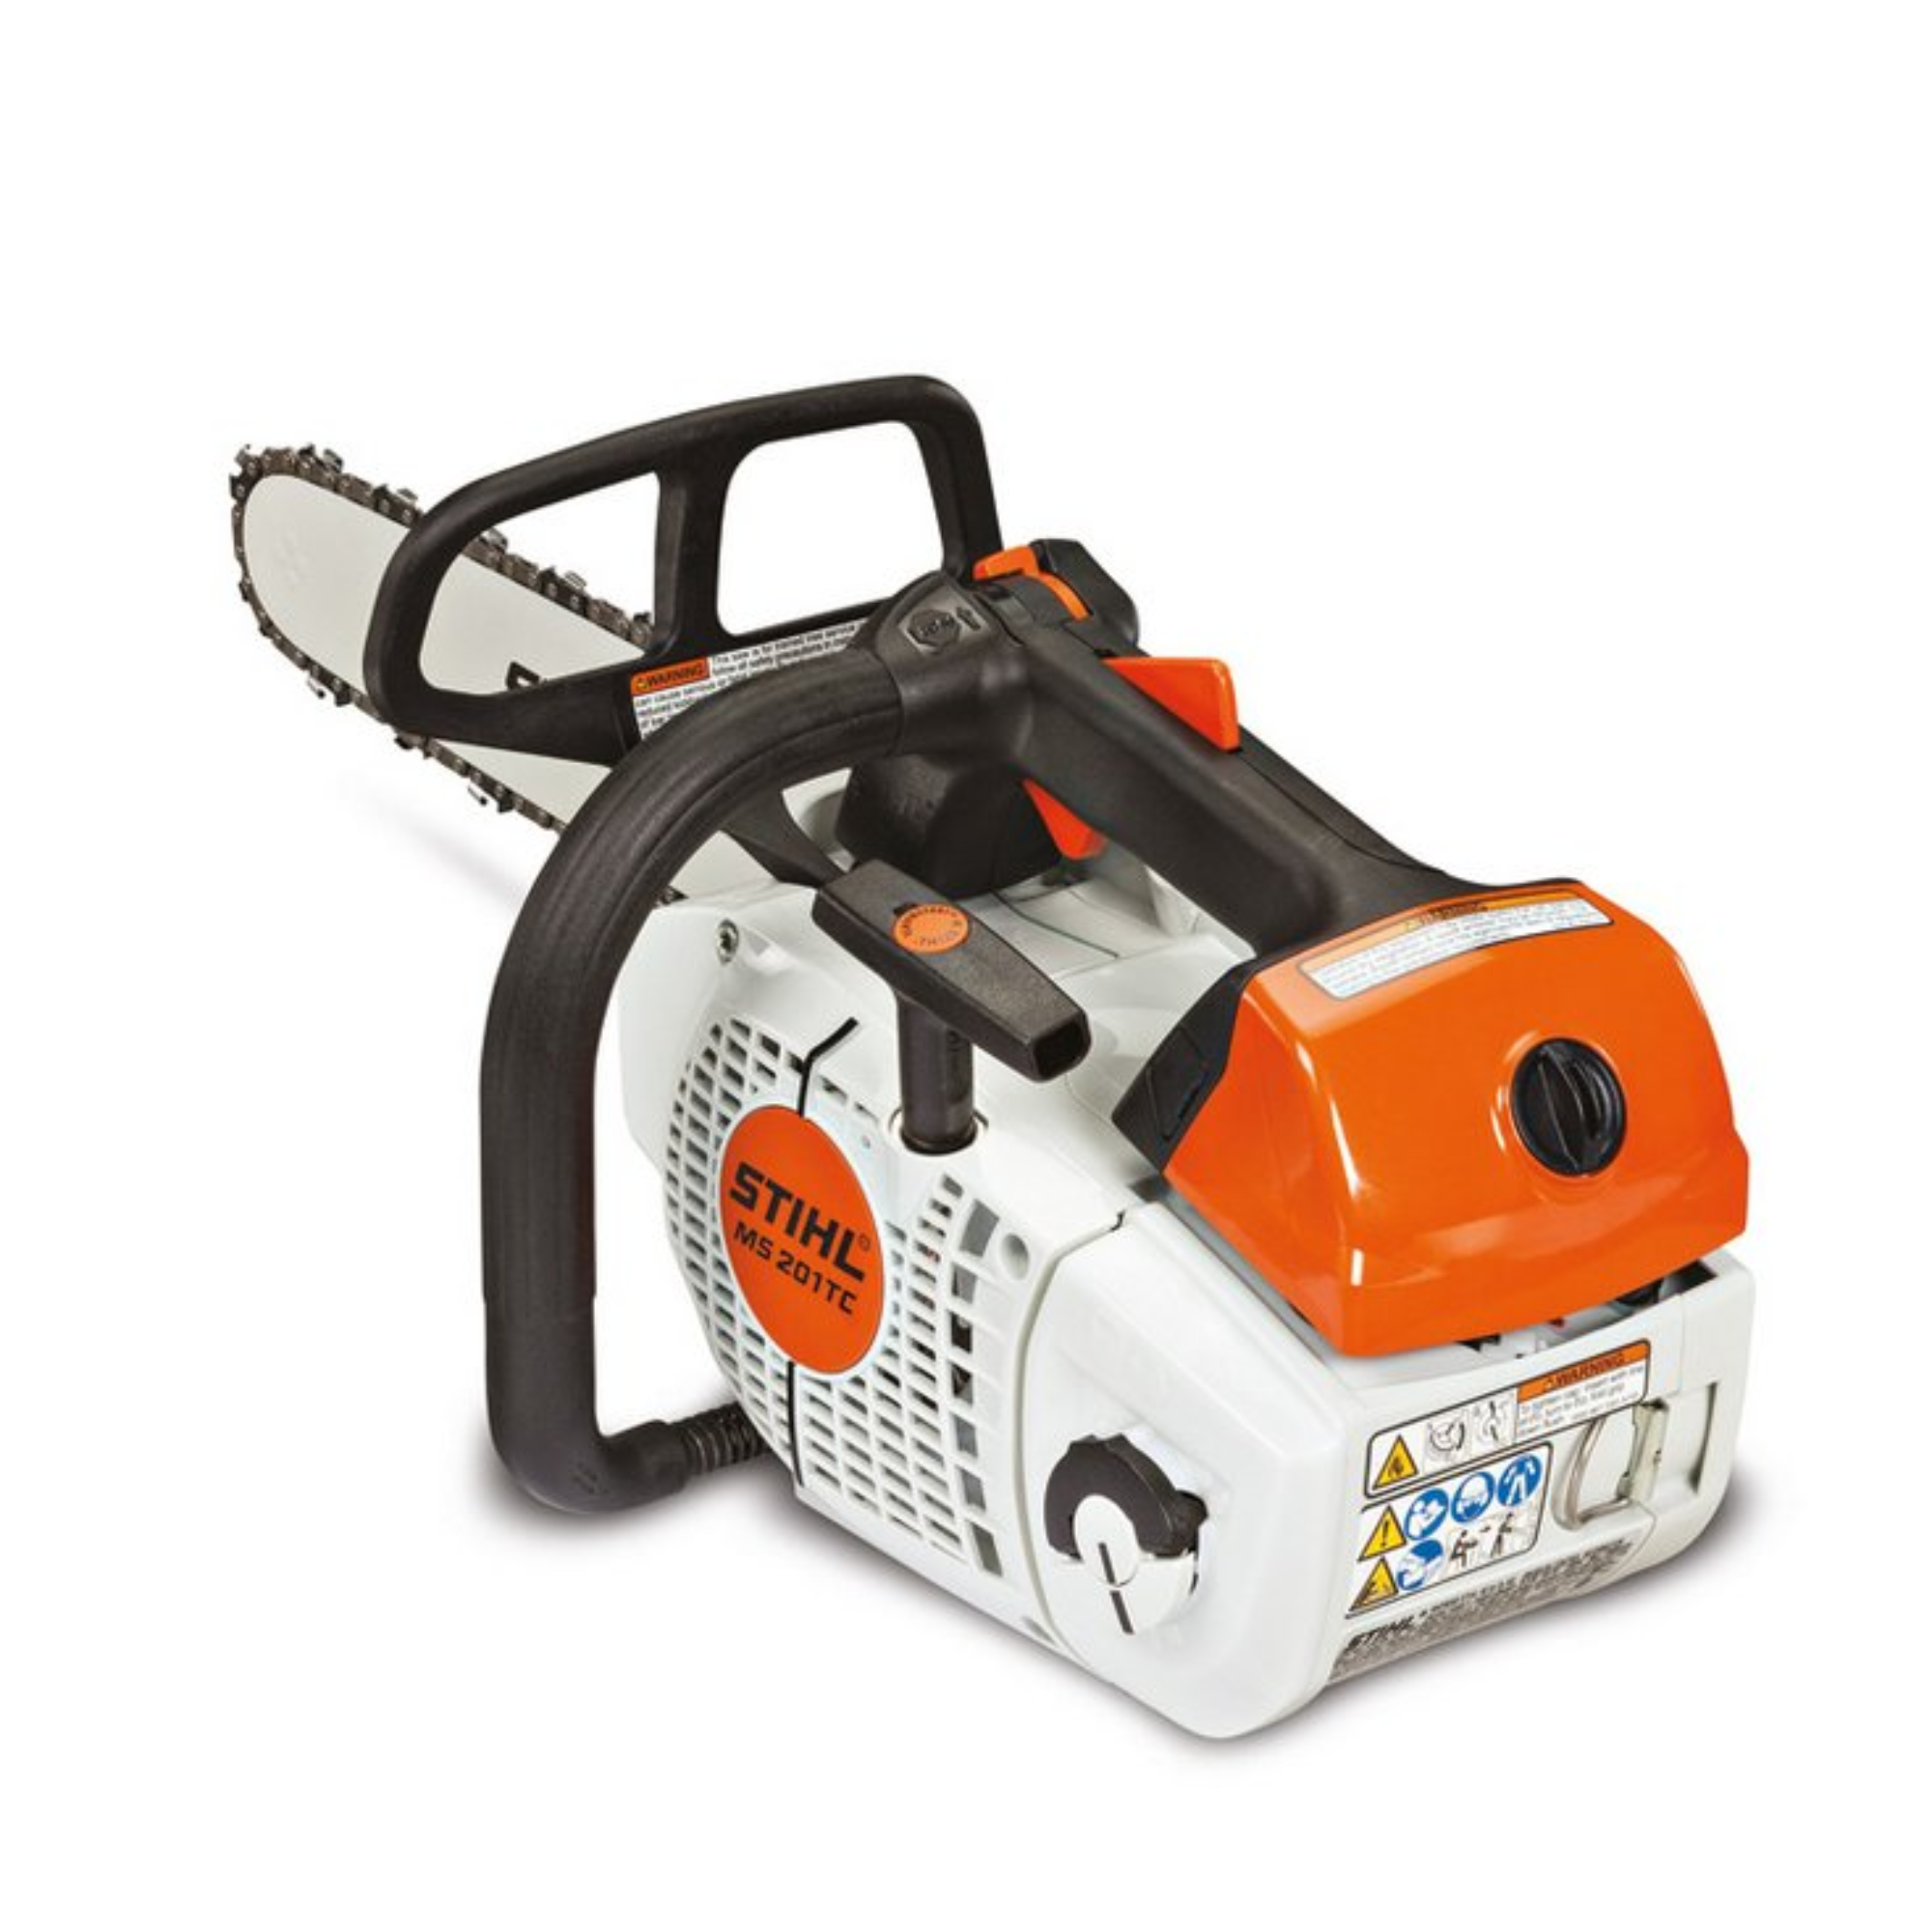 Stihl MS 201 T C-M Gas Powered 14 Inch In-Tree Chainsaw with M-Tronic